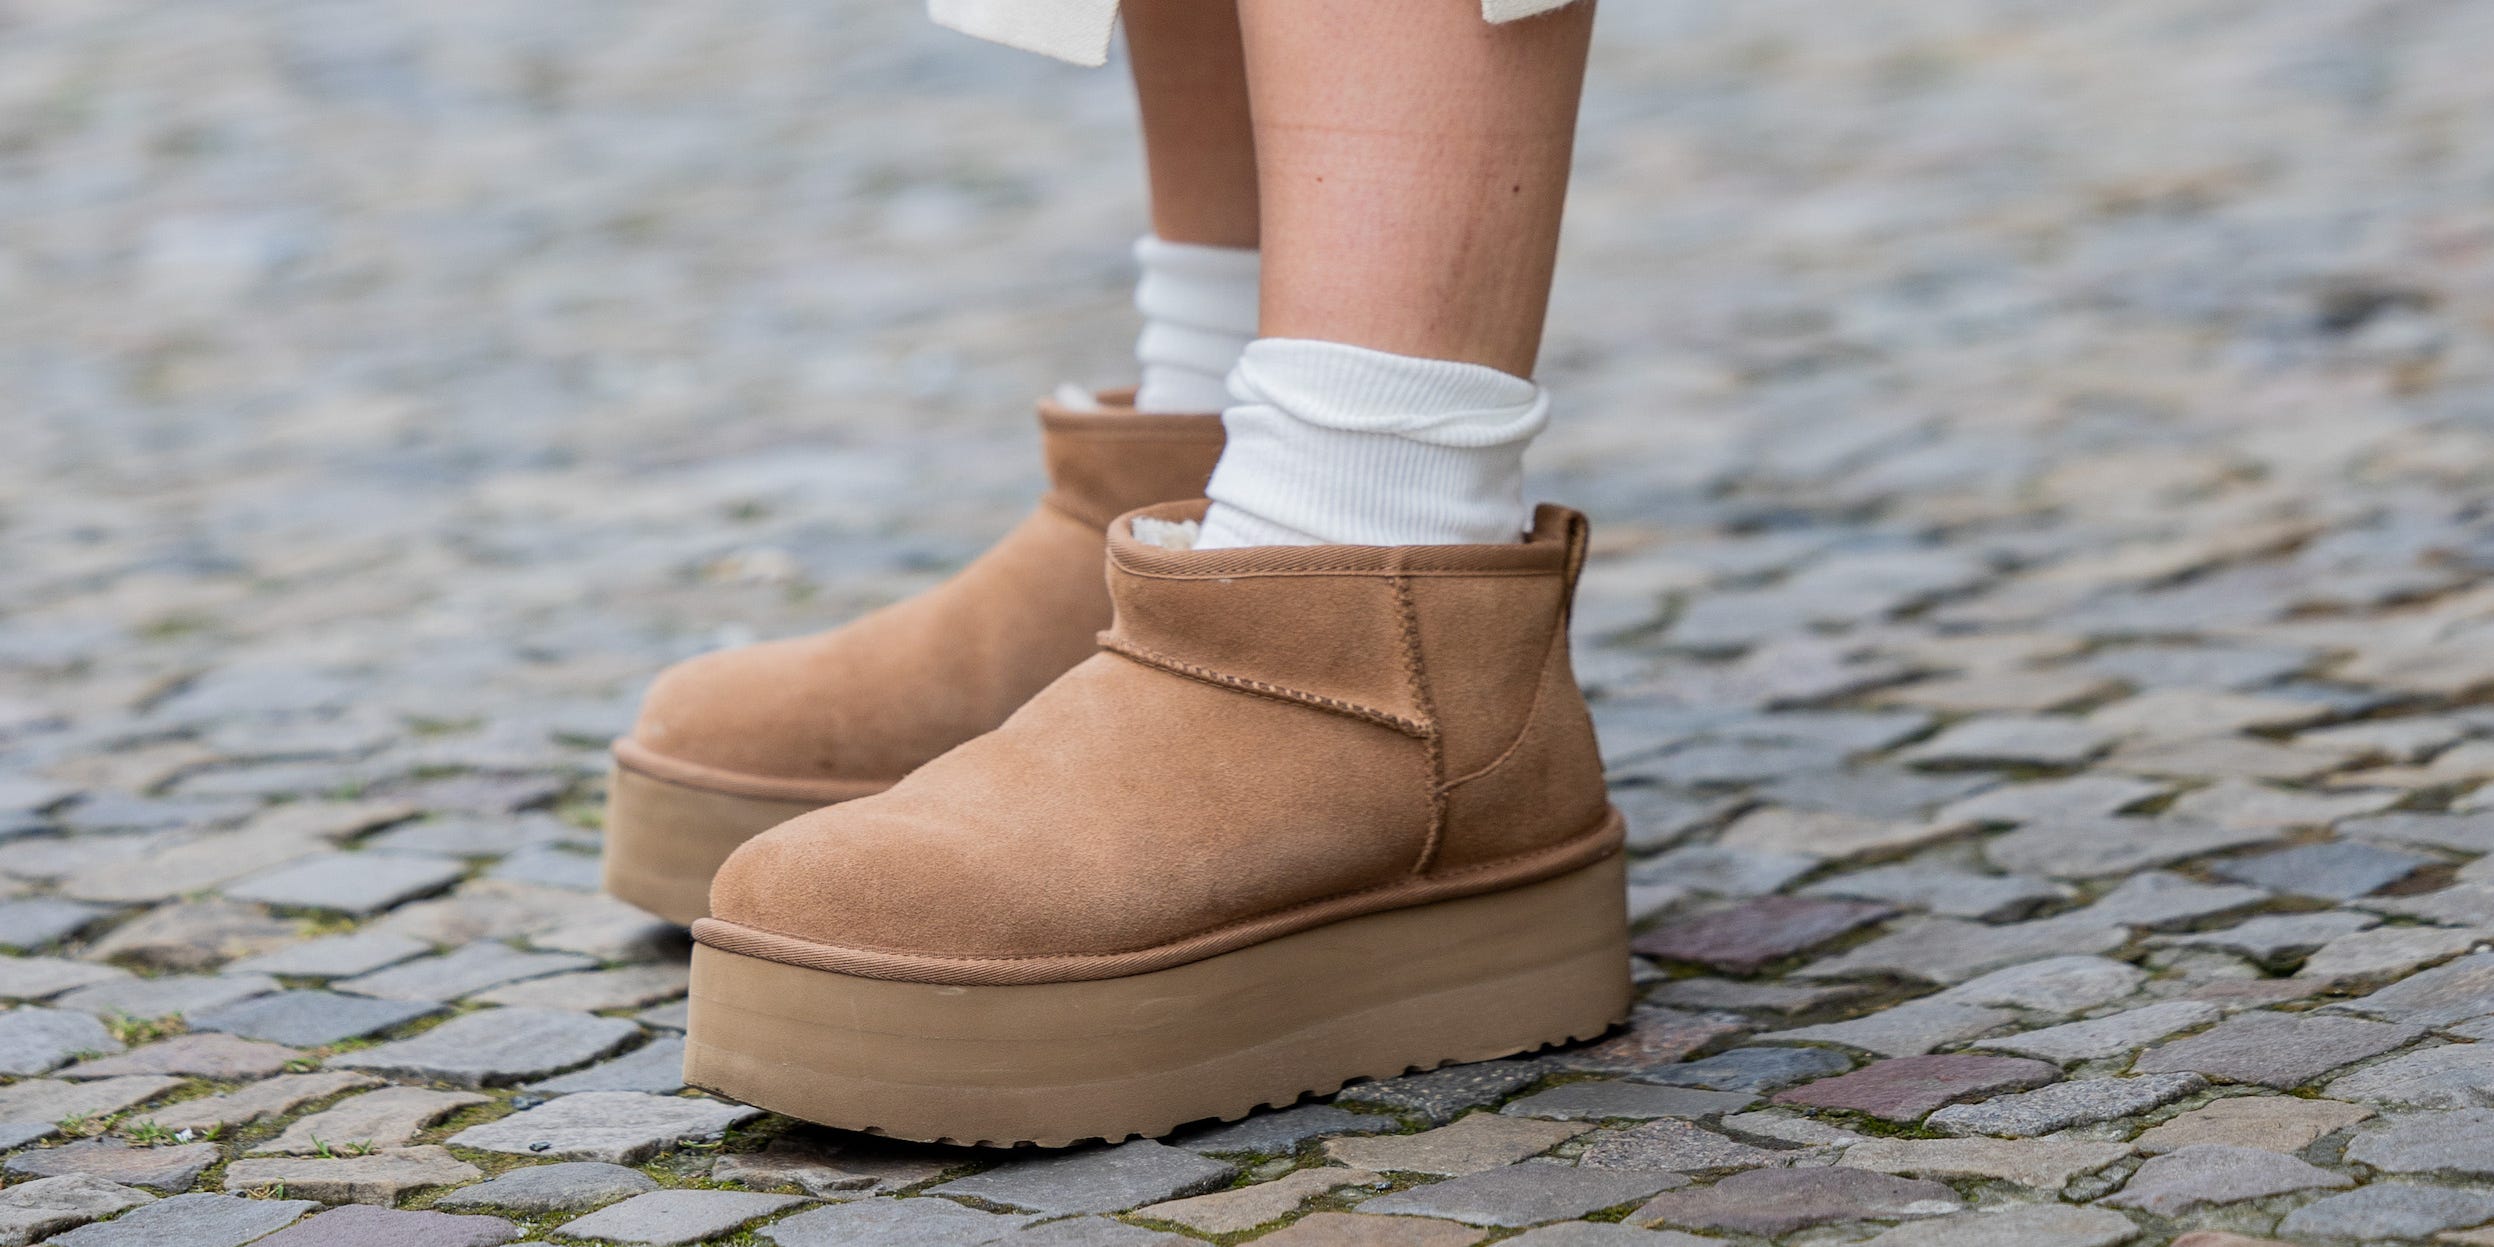 Ugg Boots Mini-Plateaustiefel